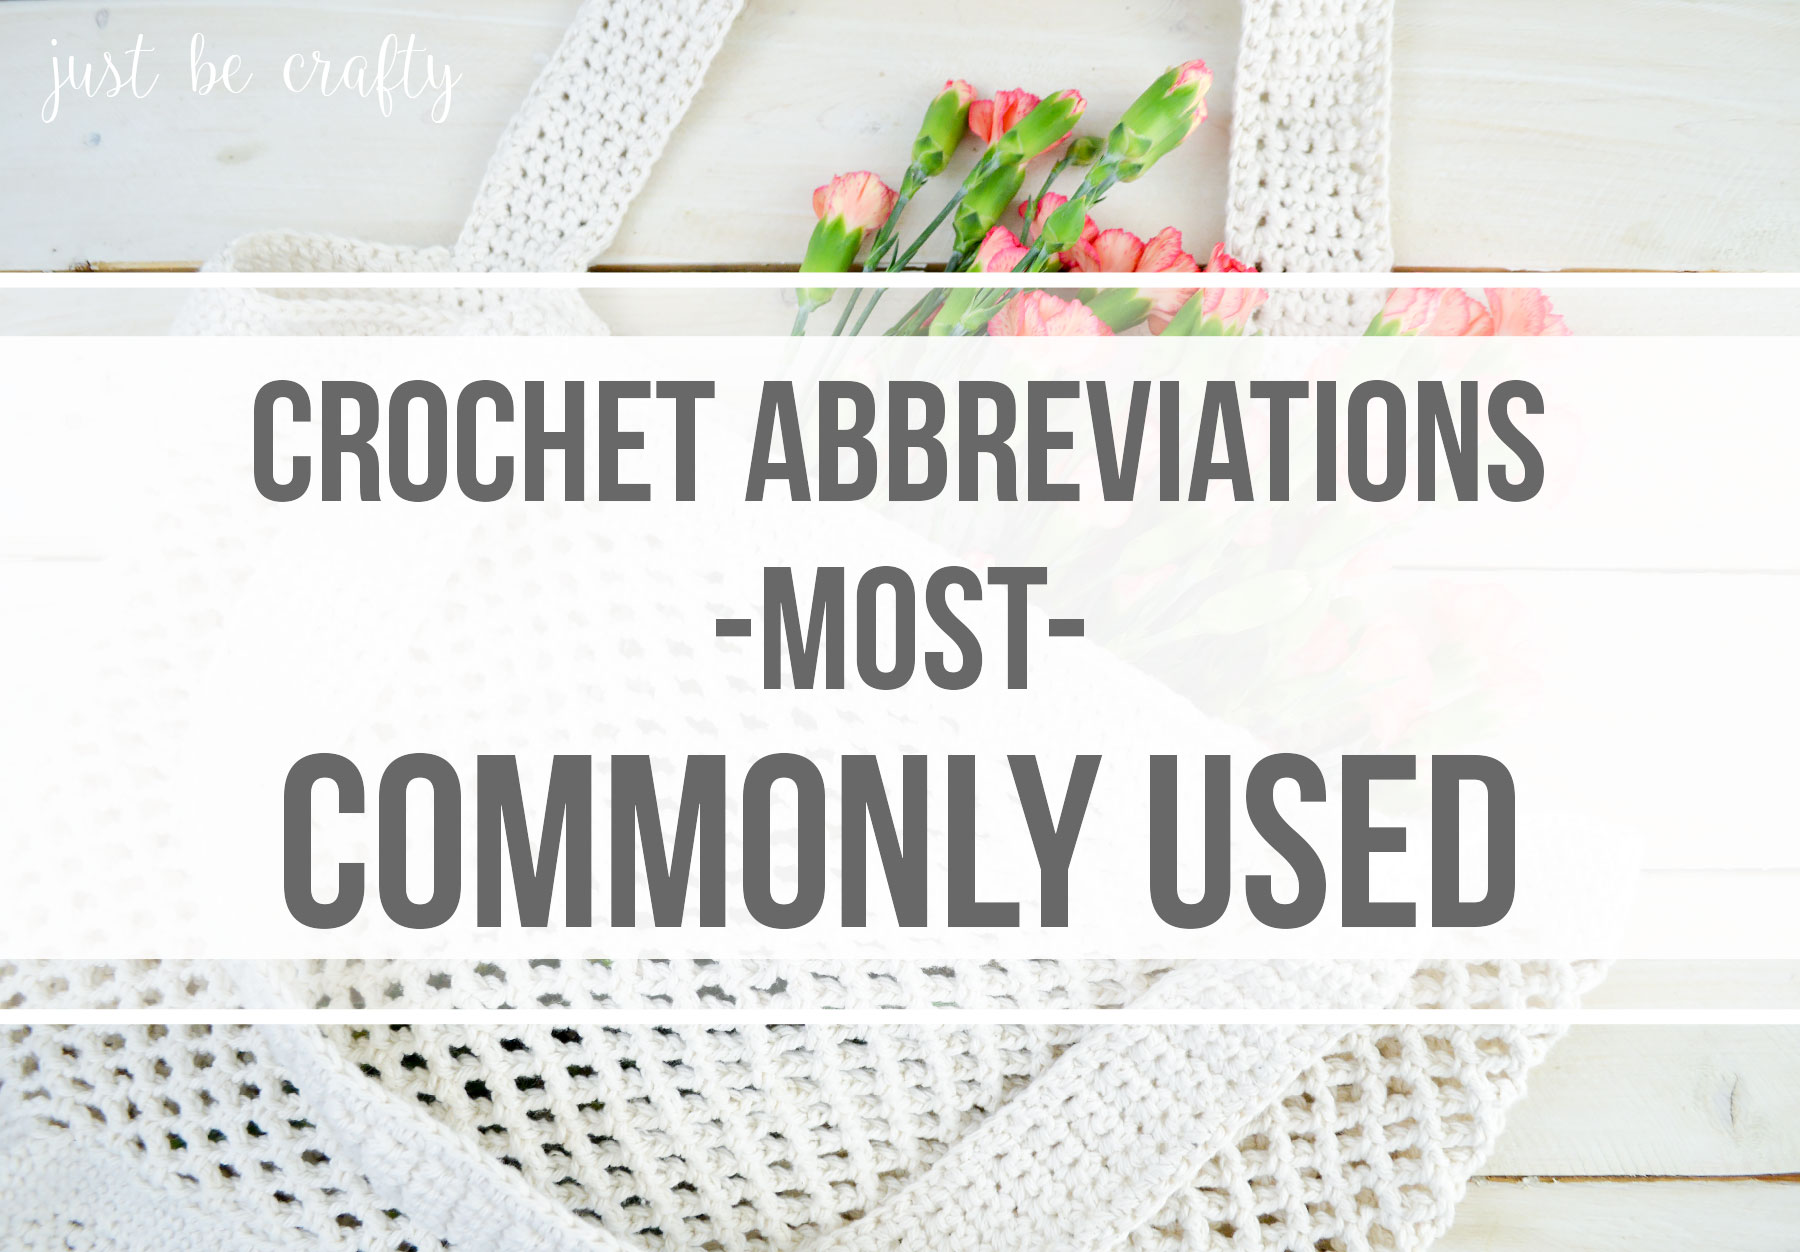 Most Commonly Used Crochet Abbreviations - Just Be Crafty